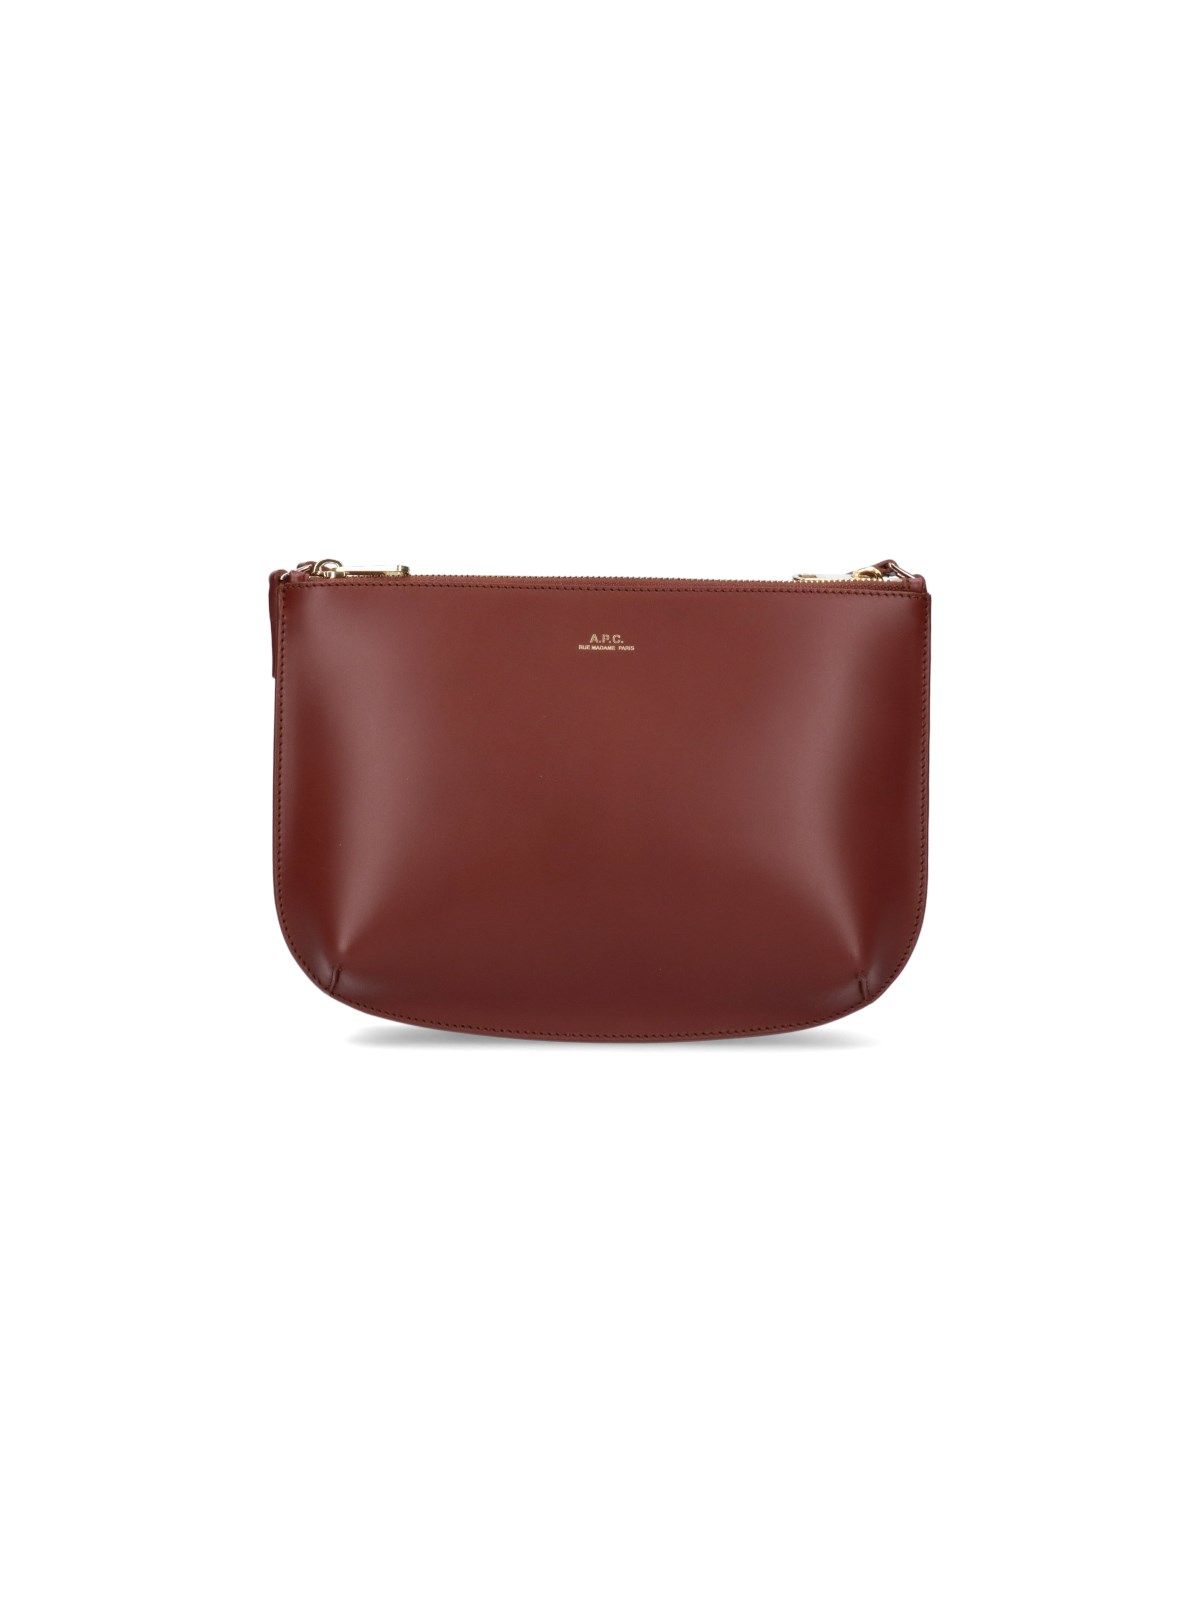 Apc Brown Sarah Bag With Front Logo Lettering